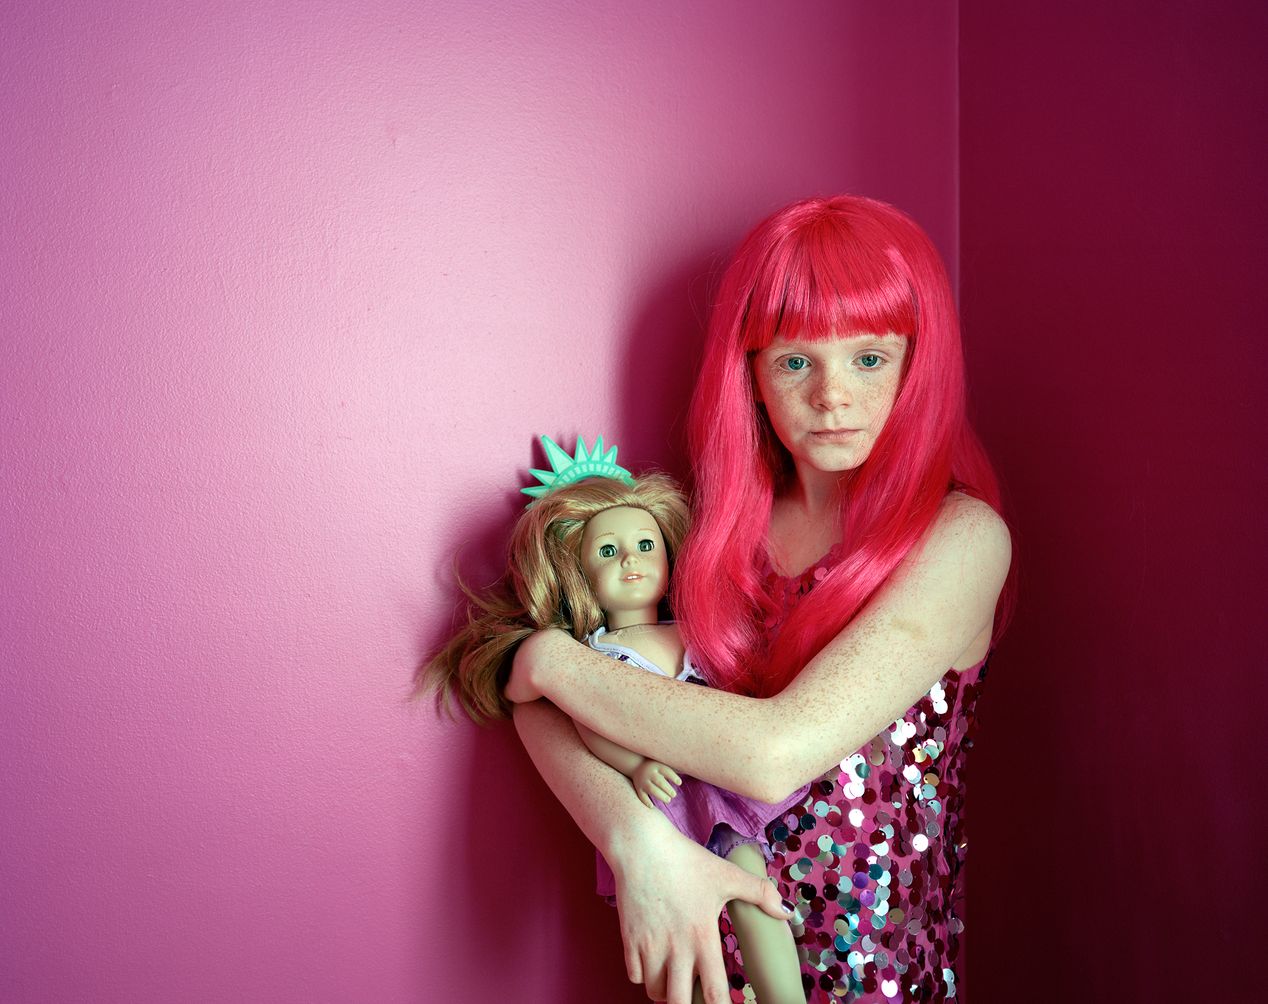 A young girl holding a doll against a bright pink wall, environmental portrait photography, Ilona Szwarc, contemporary Los Angeles artist.